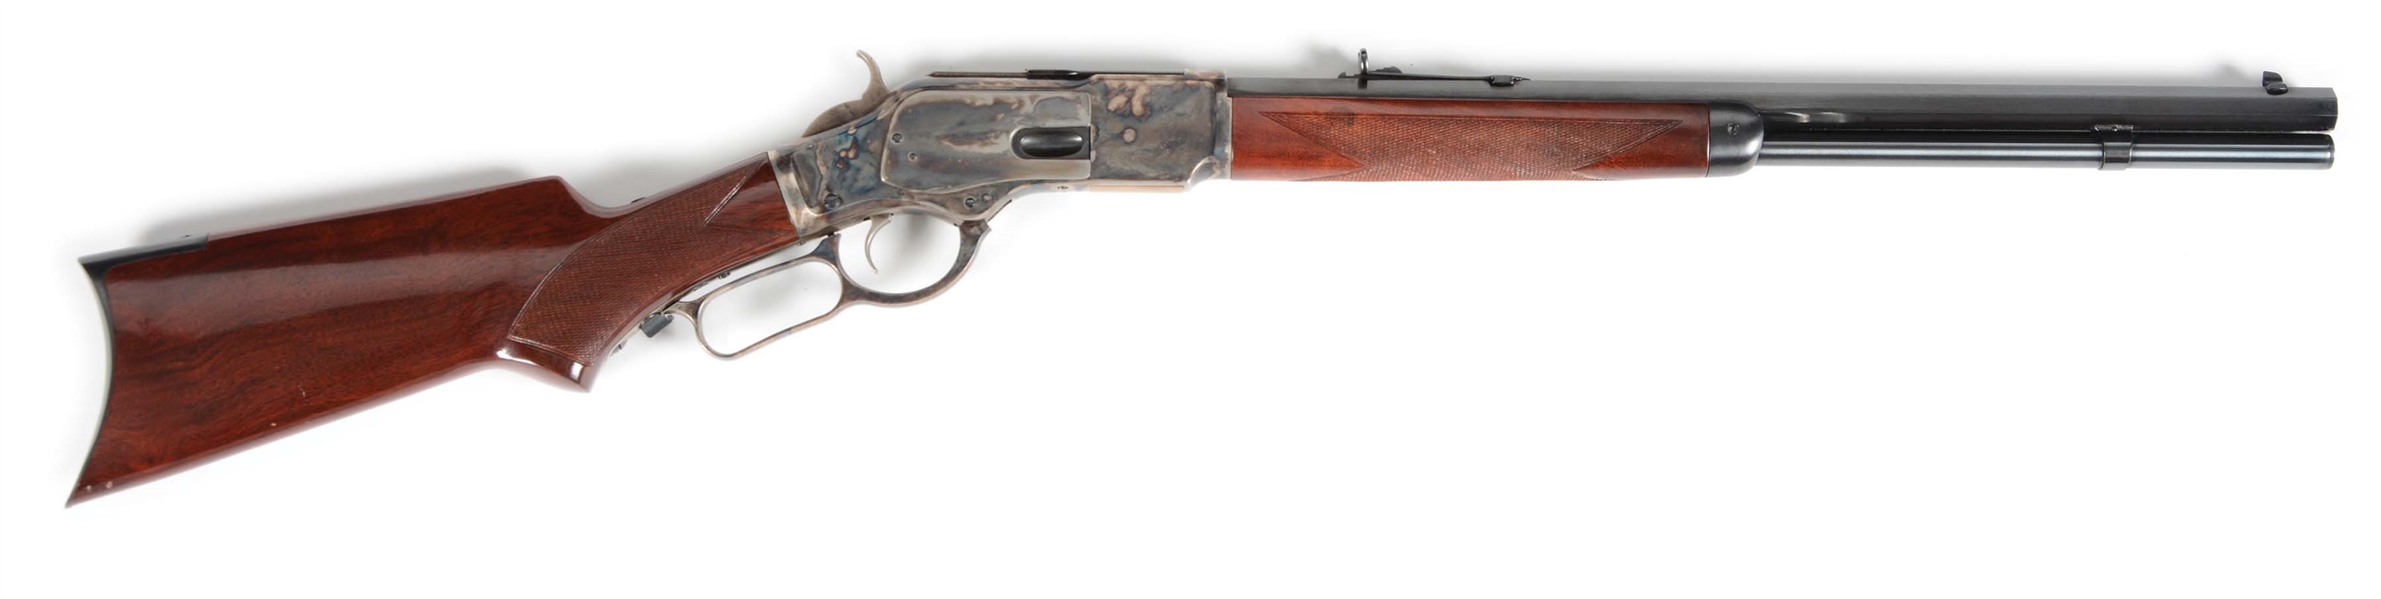 (M) UBERTI REPRODUCTION OF WINCHESTER 1873 LEVER ACTION RIFLE.